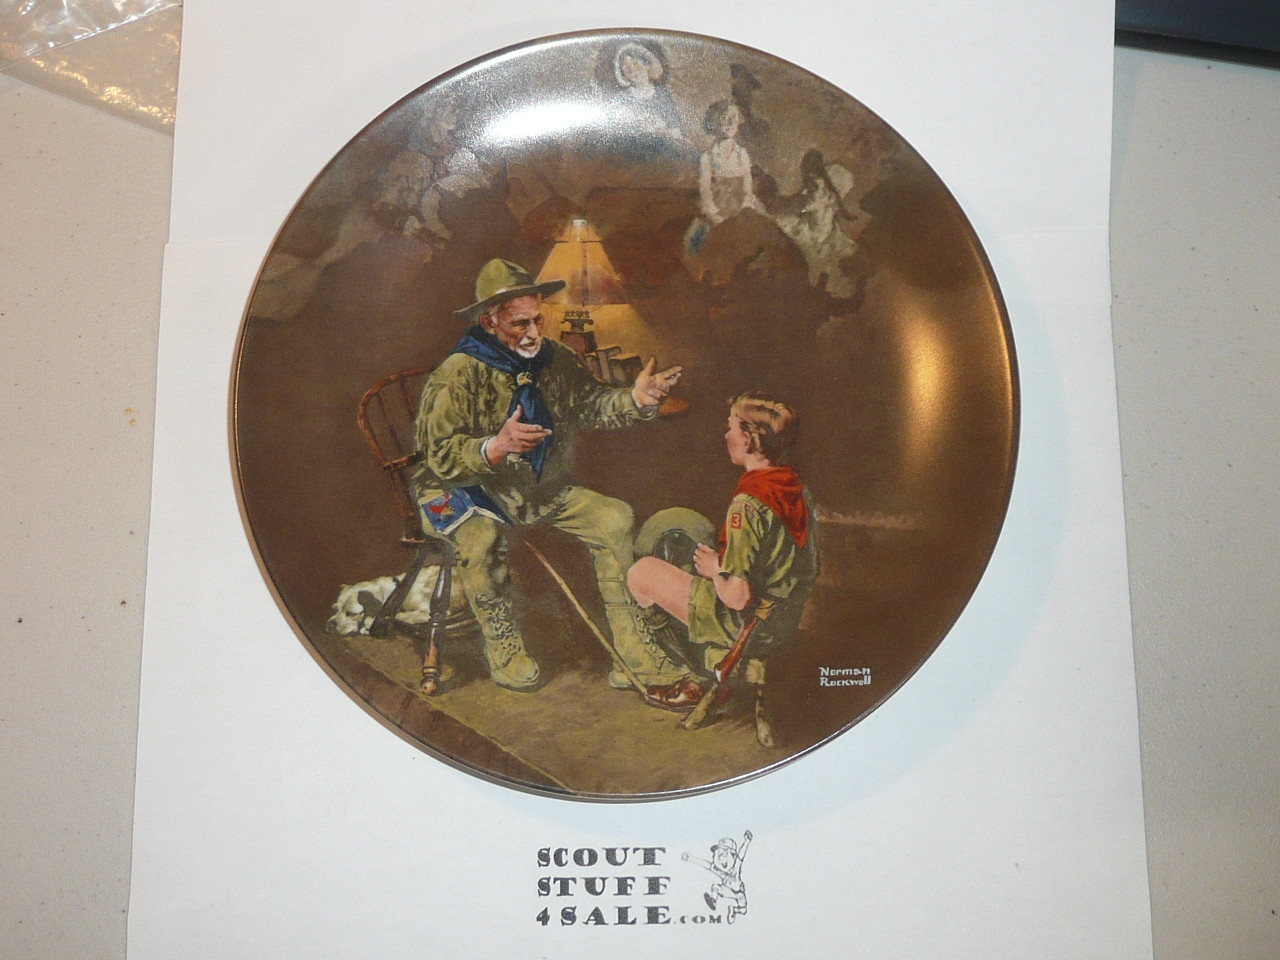 Knowles Norman Rockwell "The Old Scout" 1990, 8.5" Decorative China Plate